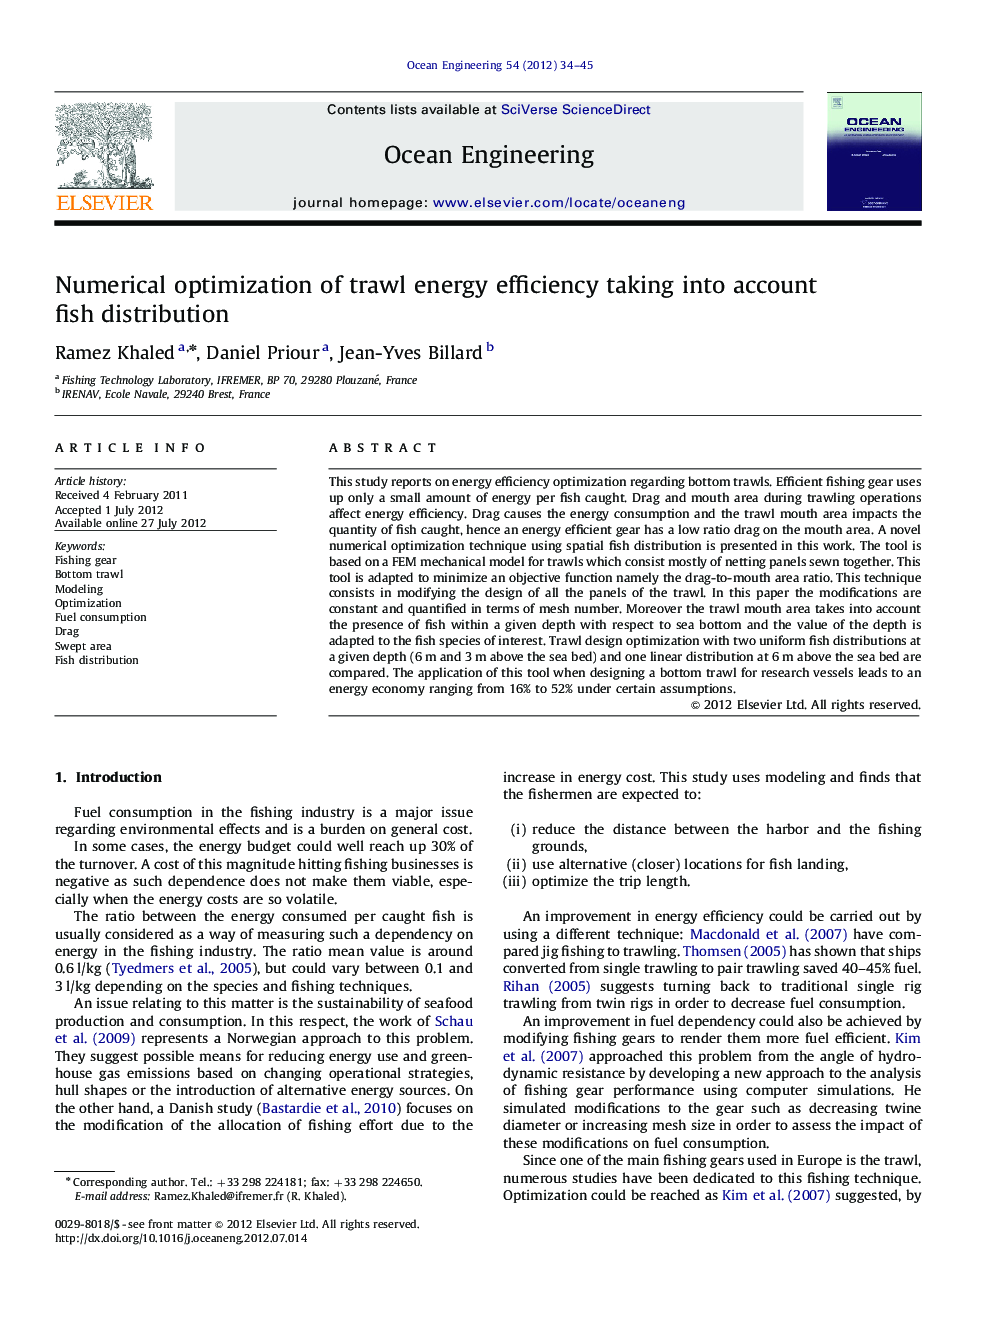 Numerical optimization of trawl energy efficiency taking into account fish distribution